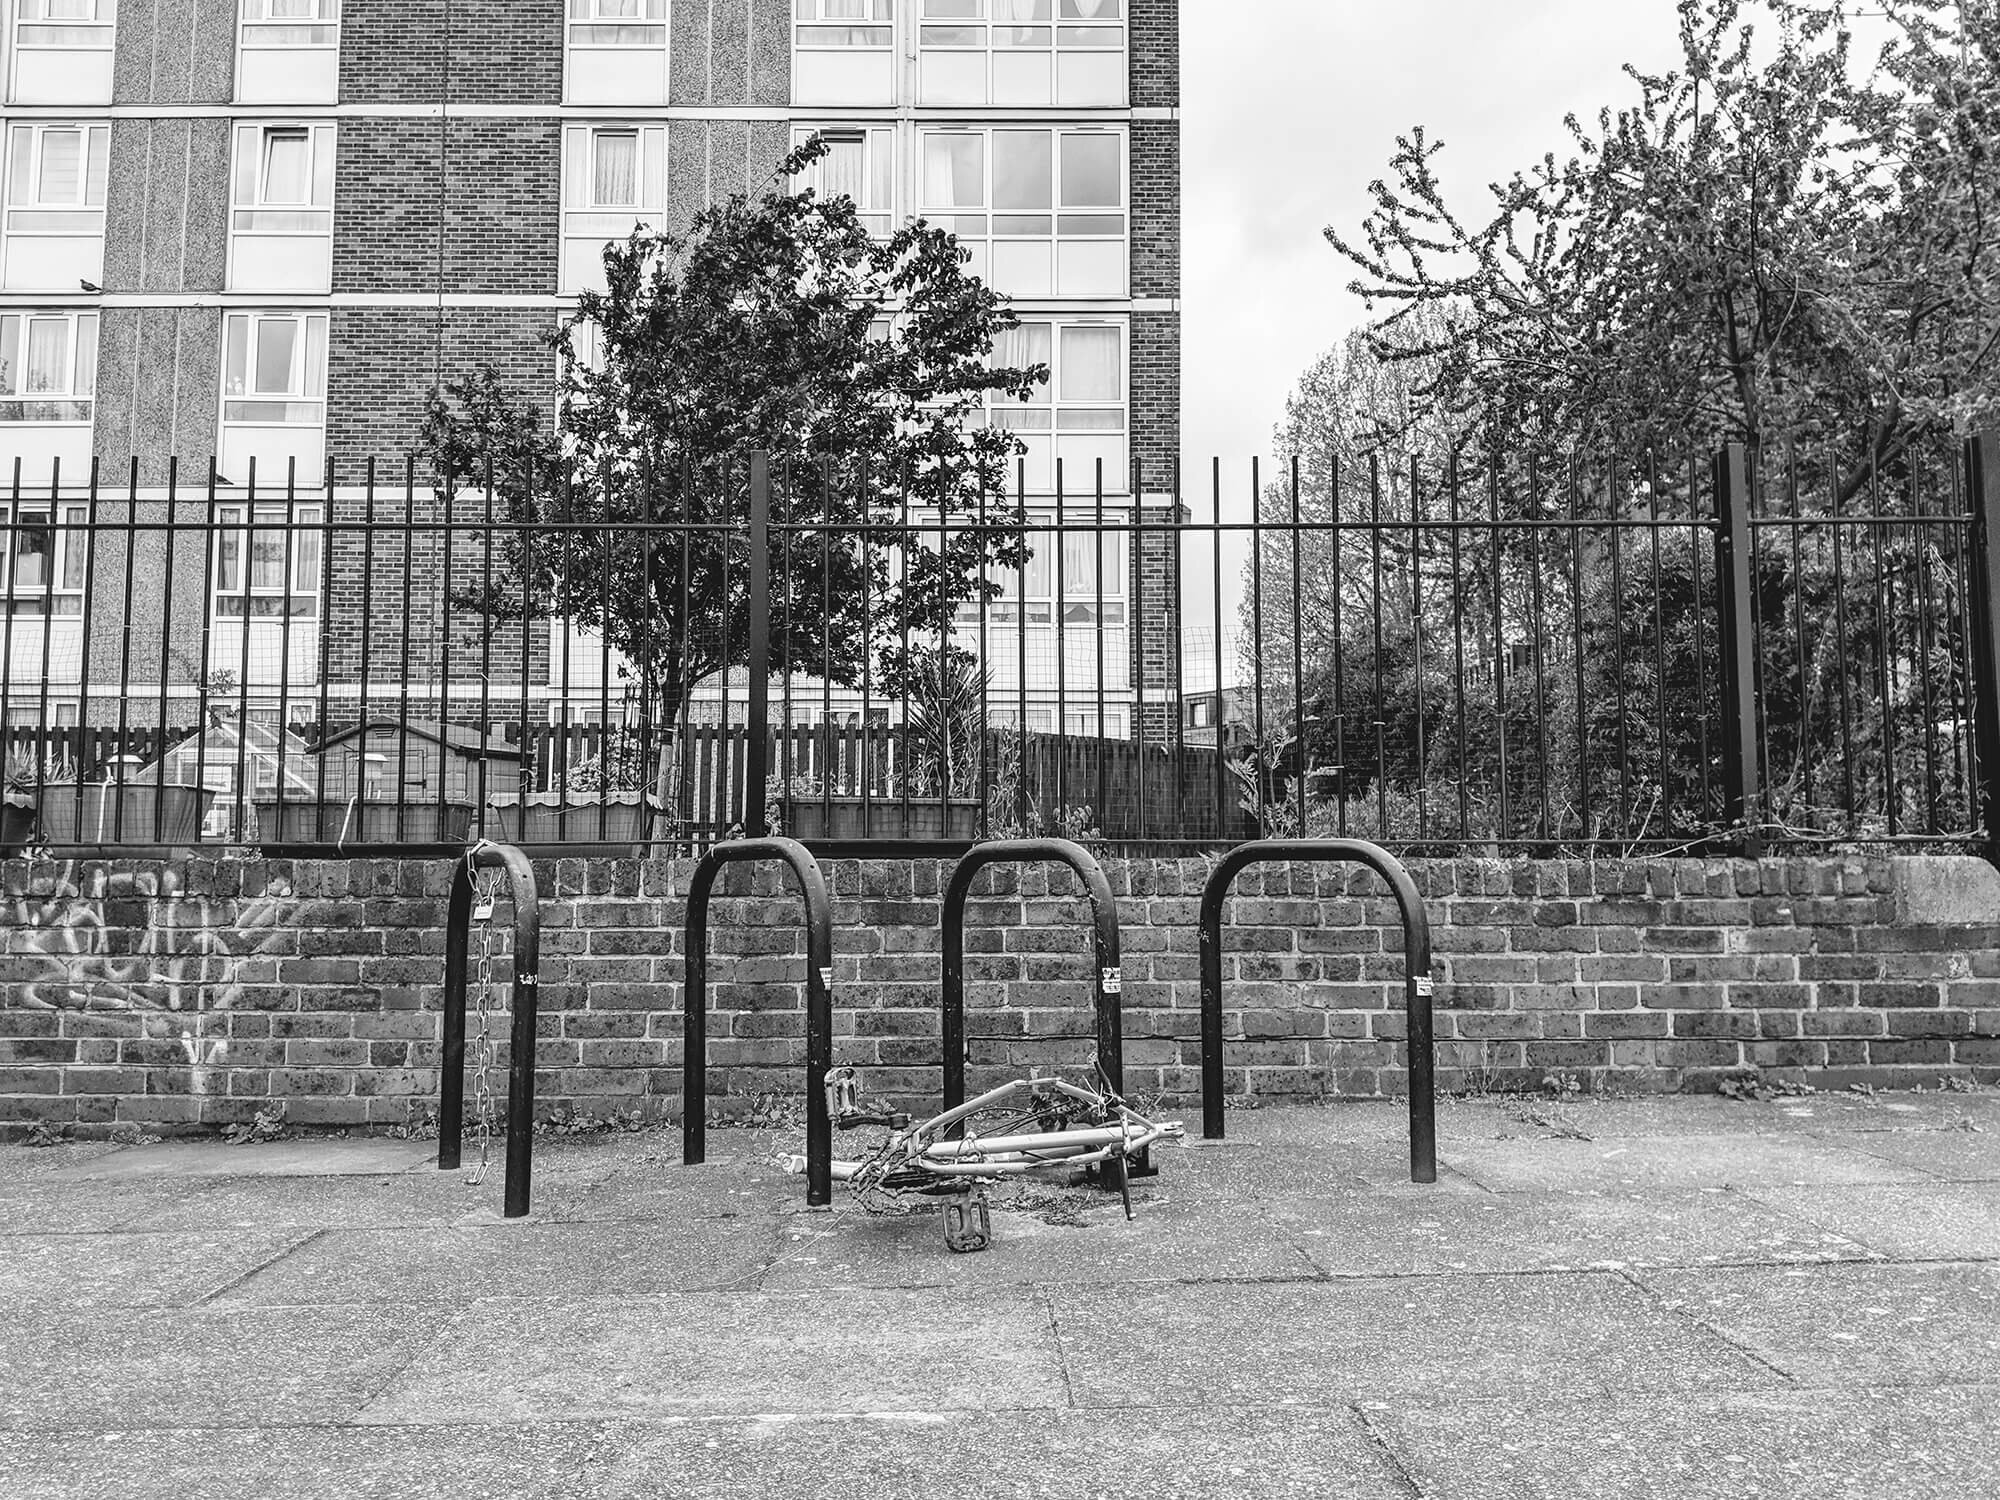 Old bike discarded on London streets. Hi rise flats in the background.